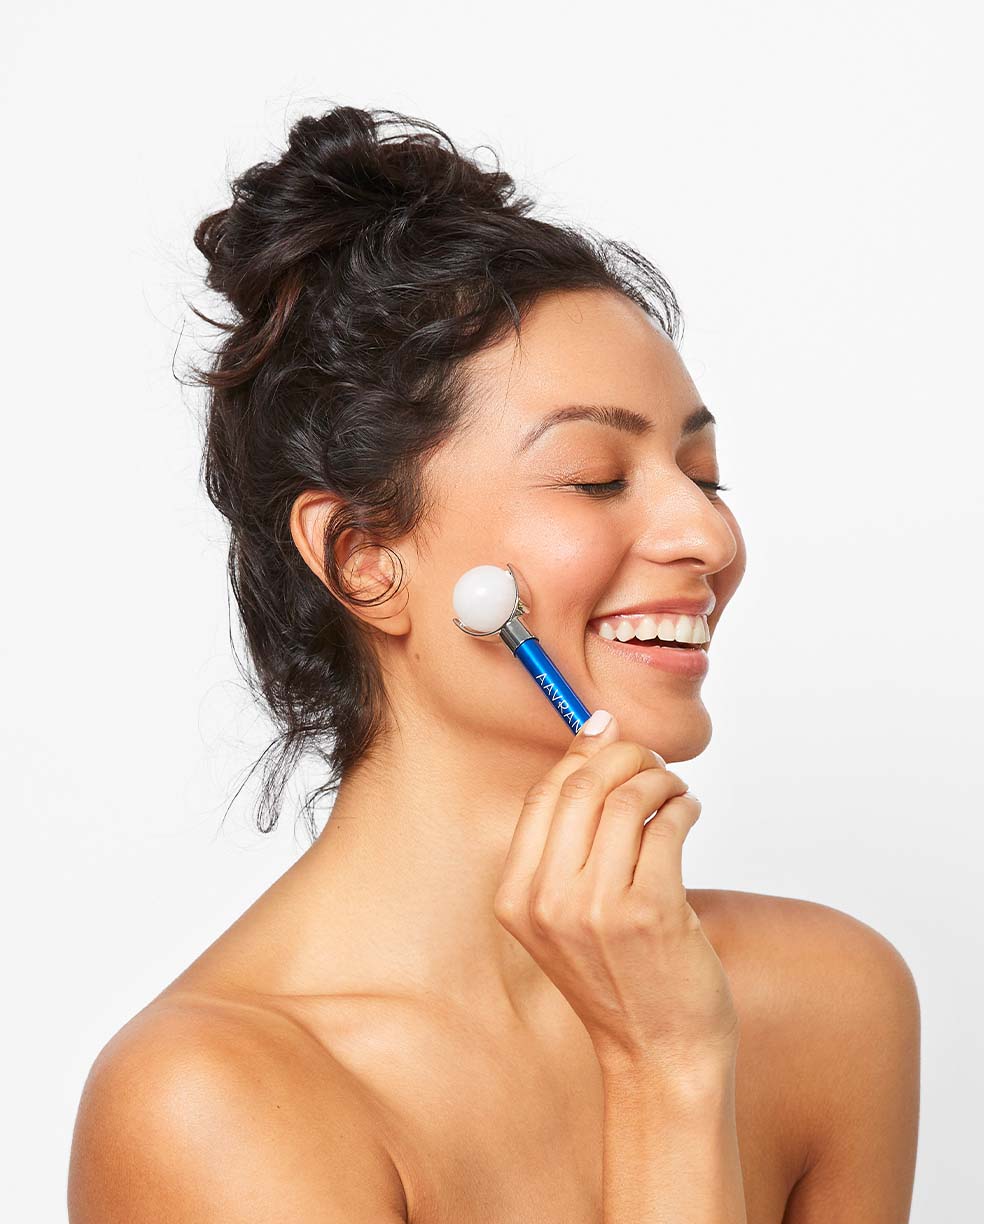 Rollmate Facial Roller being used by model